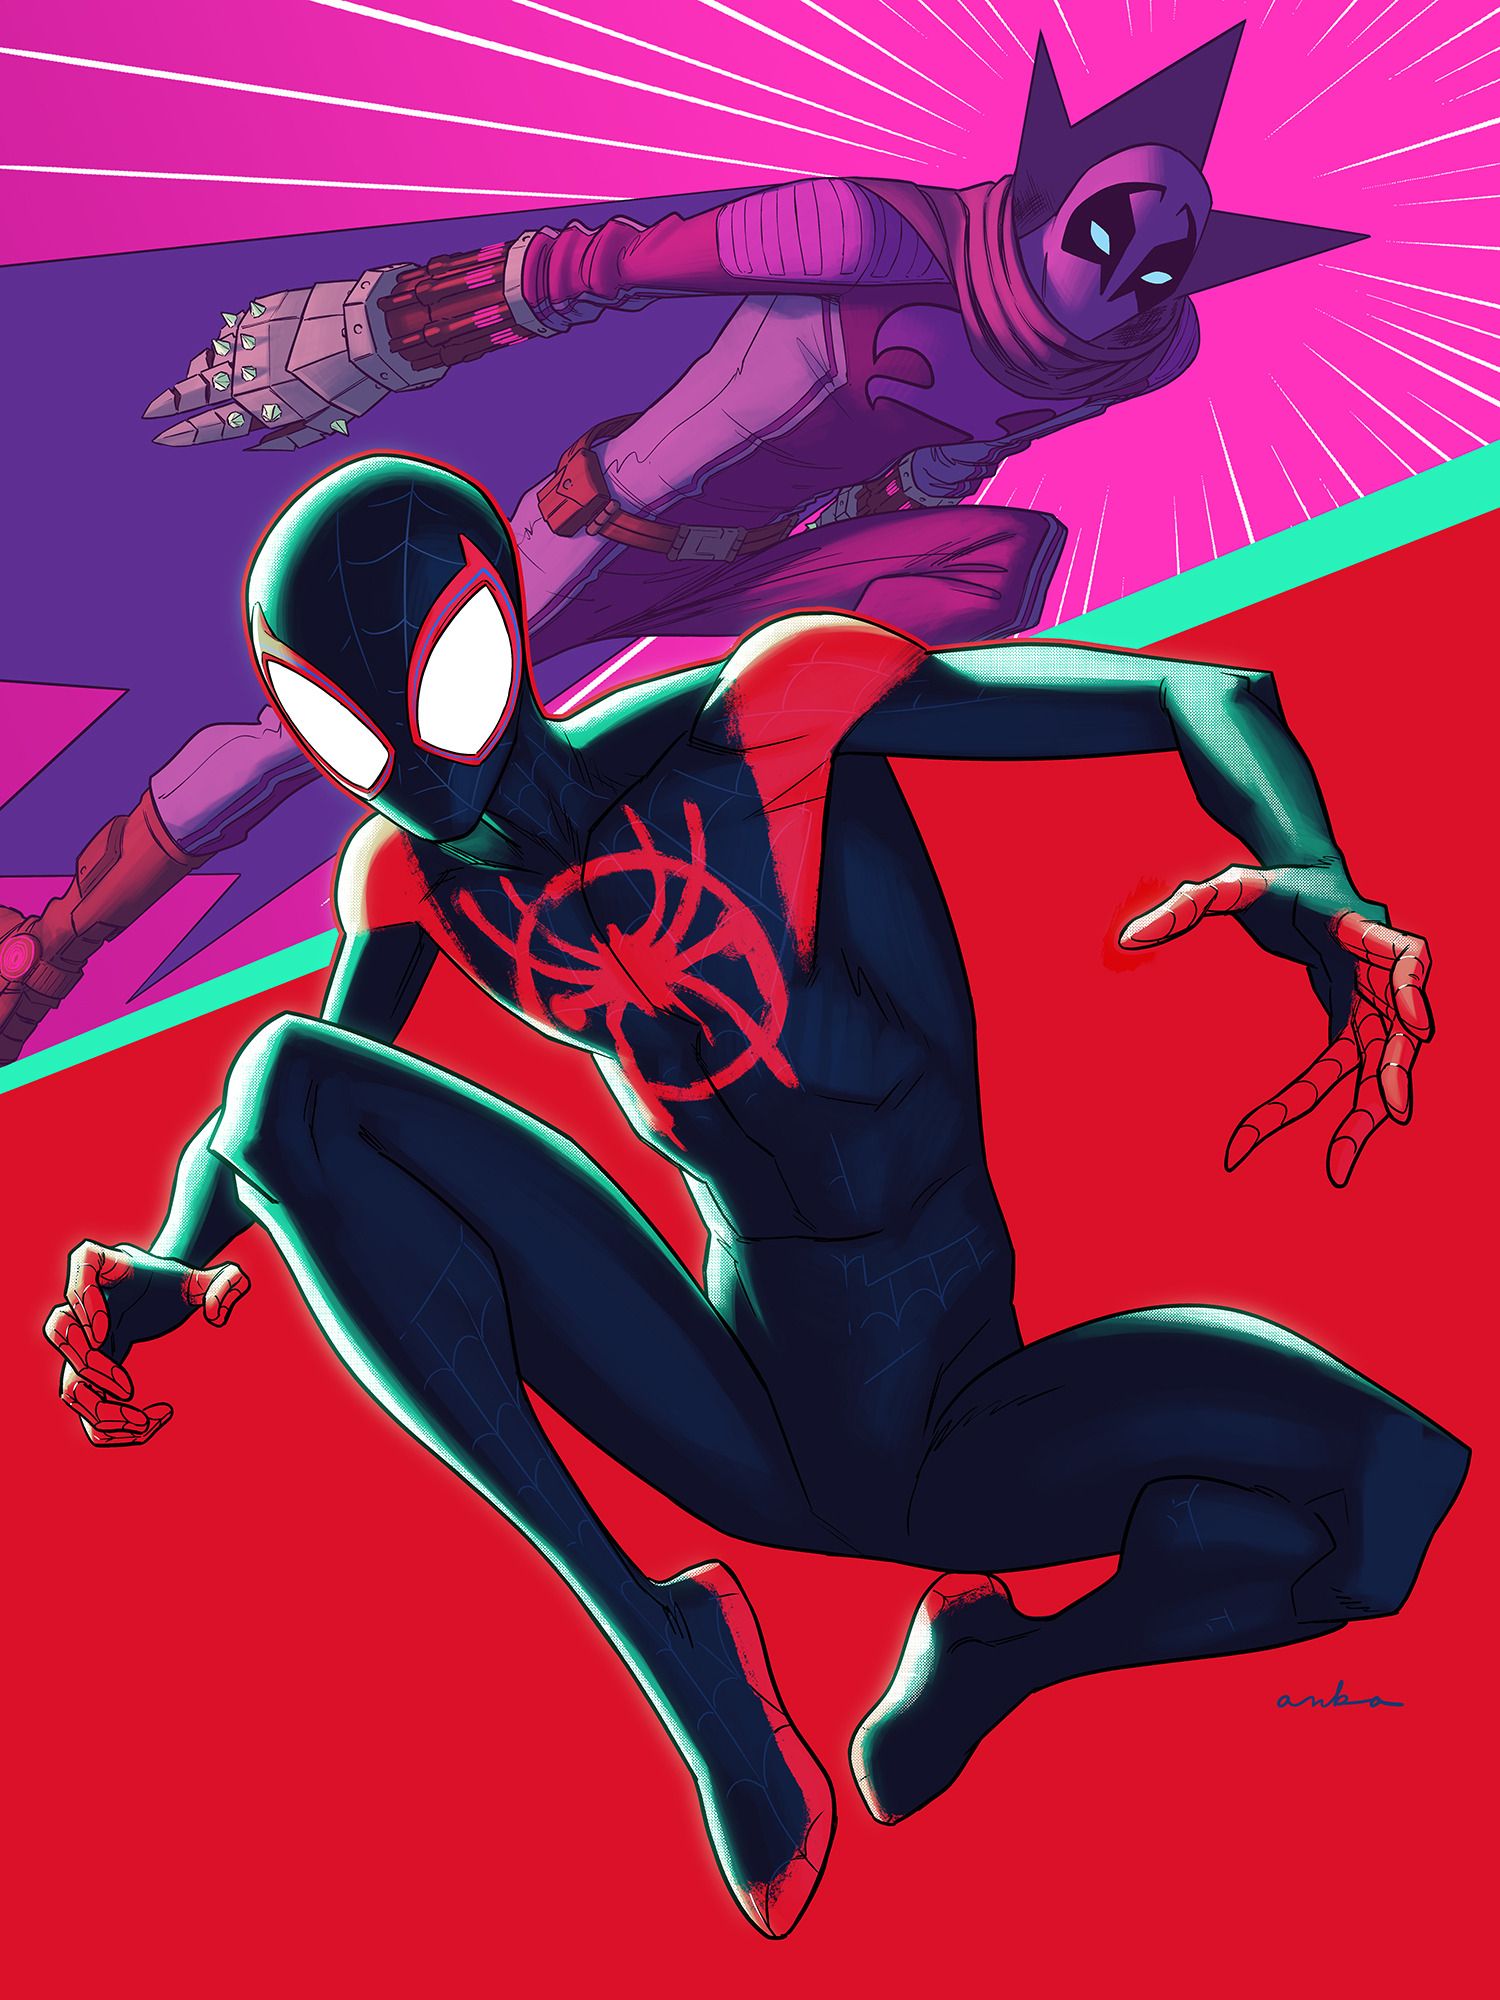 Miles Morales and Prowler by Kris Anka *. Marvel spiderman art, Marvel superheroes art, Miles morales spiderman